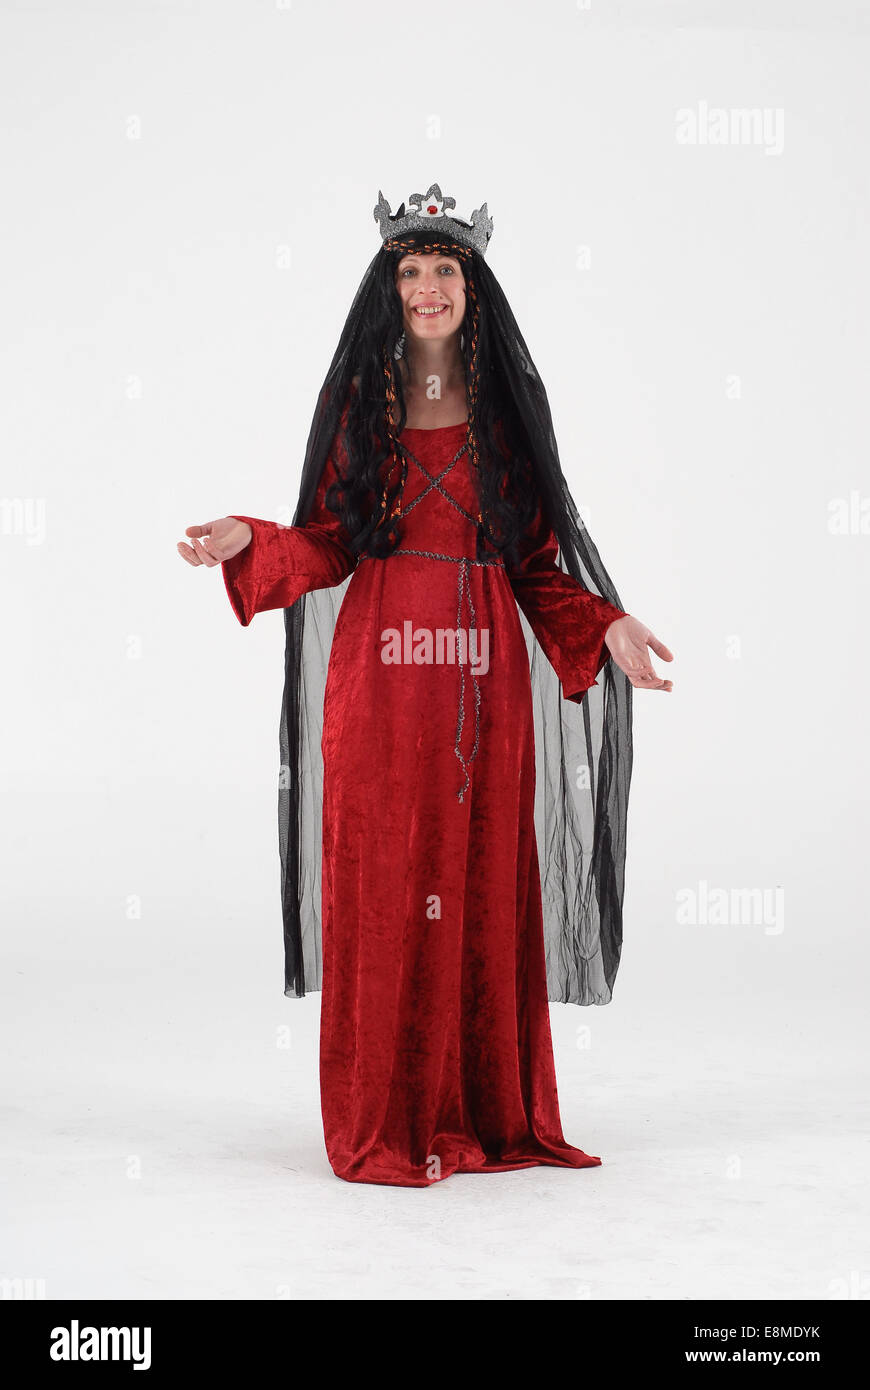 Woman in fancy dress comedy costume in a medieval queen historical outfit with crown, black veil and red dress Stock Photo